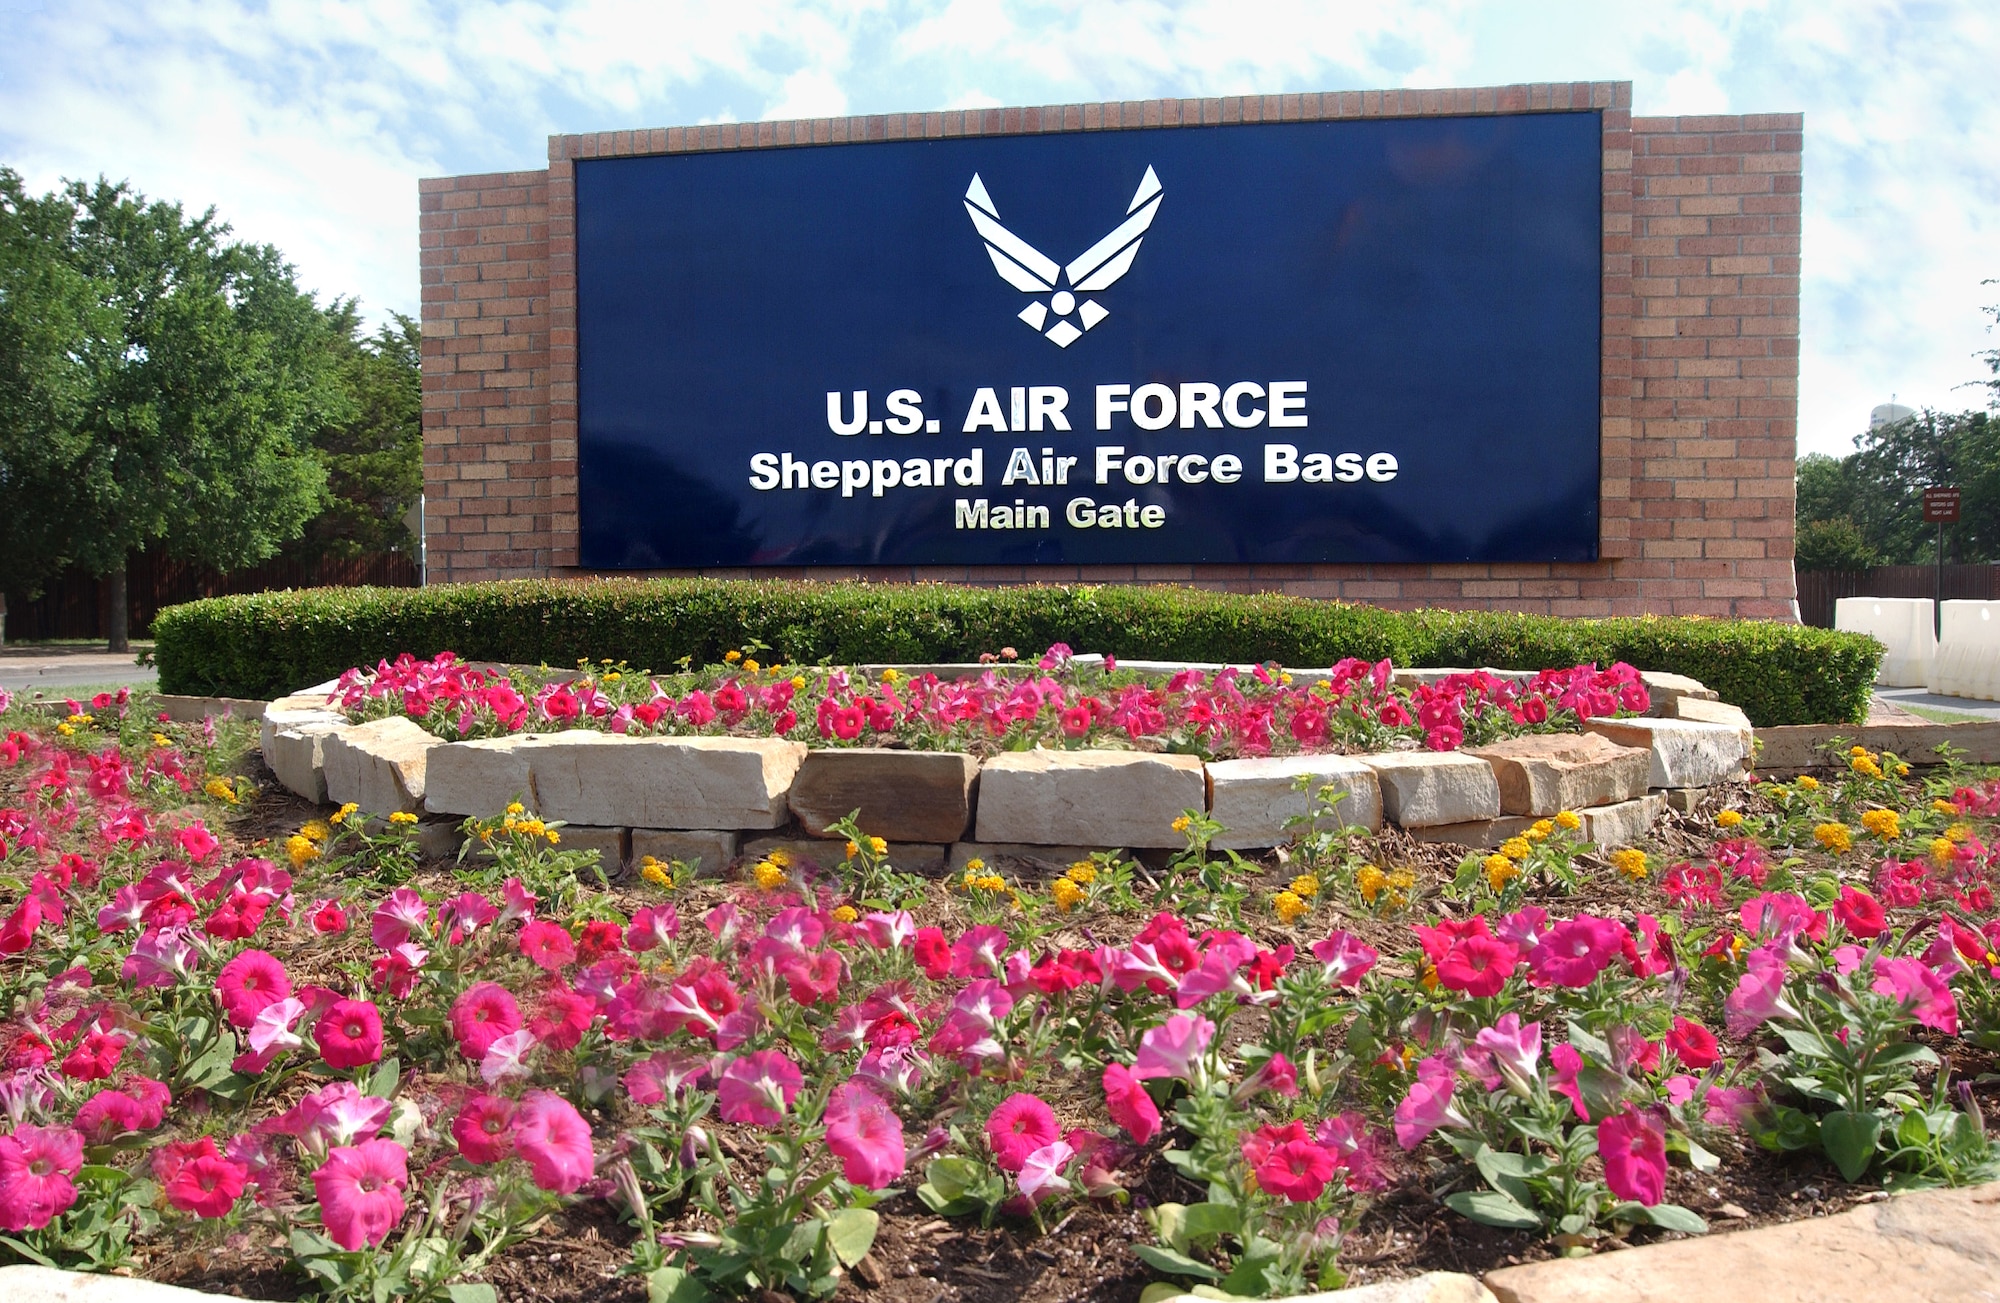 Sheppard Air Force Base's main gate is set to undergo several months of construction starting Oct. 31, 2011, which will affect vehicle traffic. (U.S. Air Force courtesy photo)